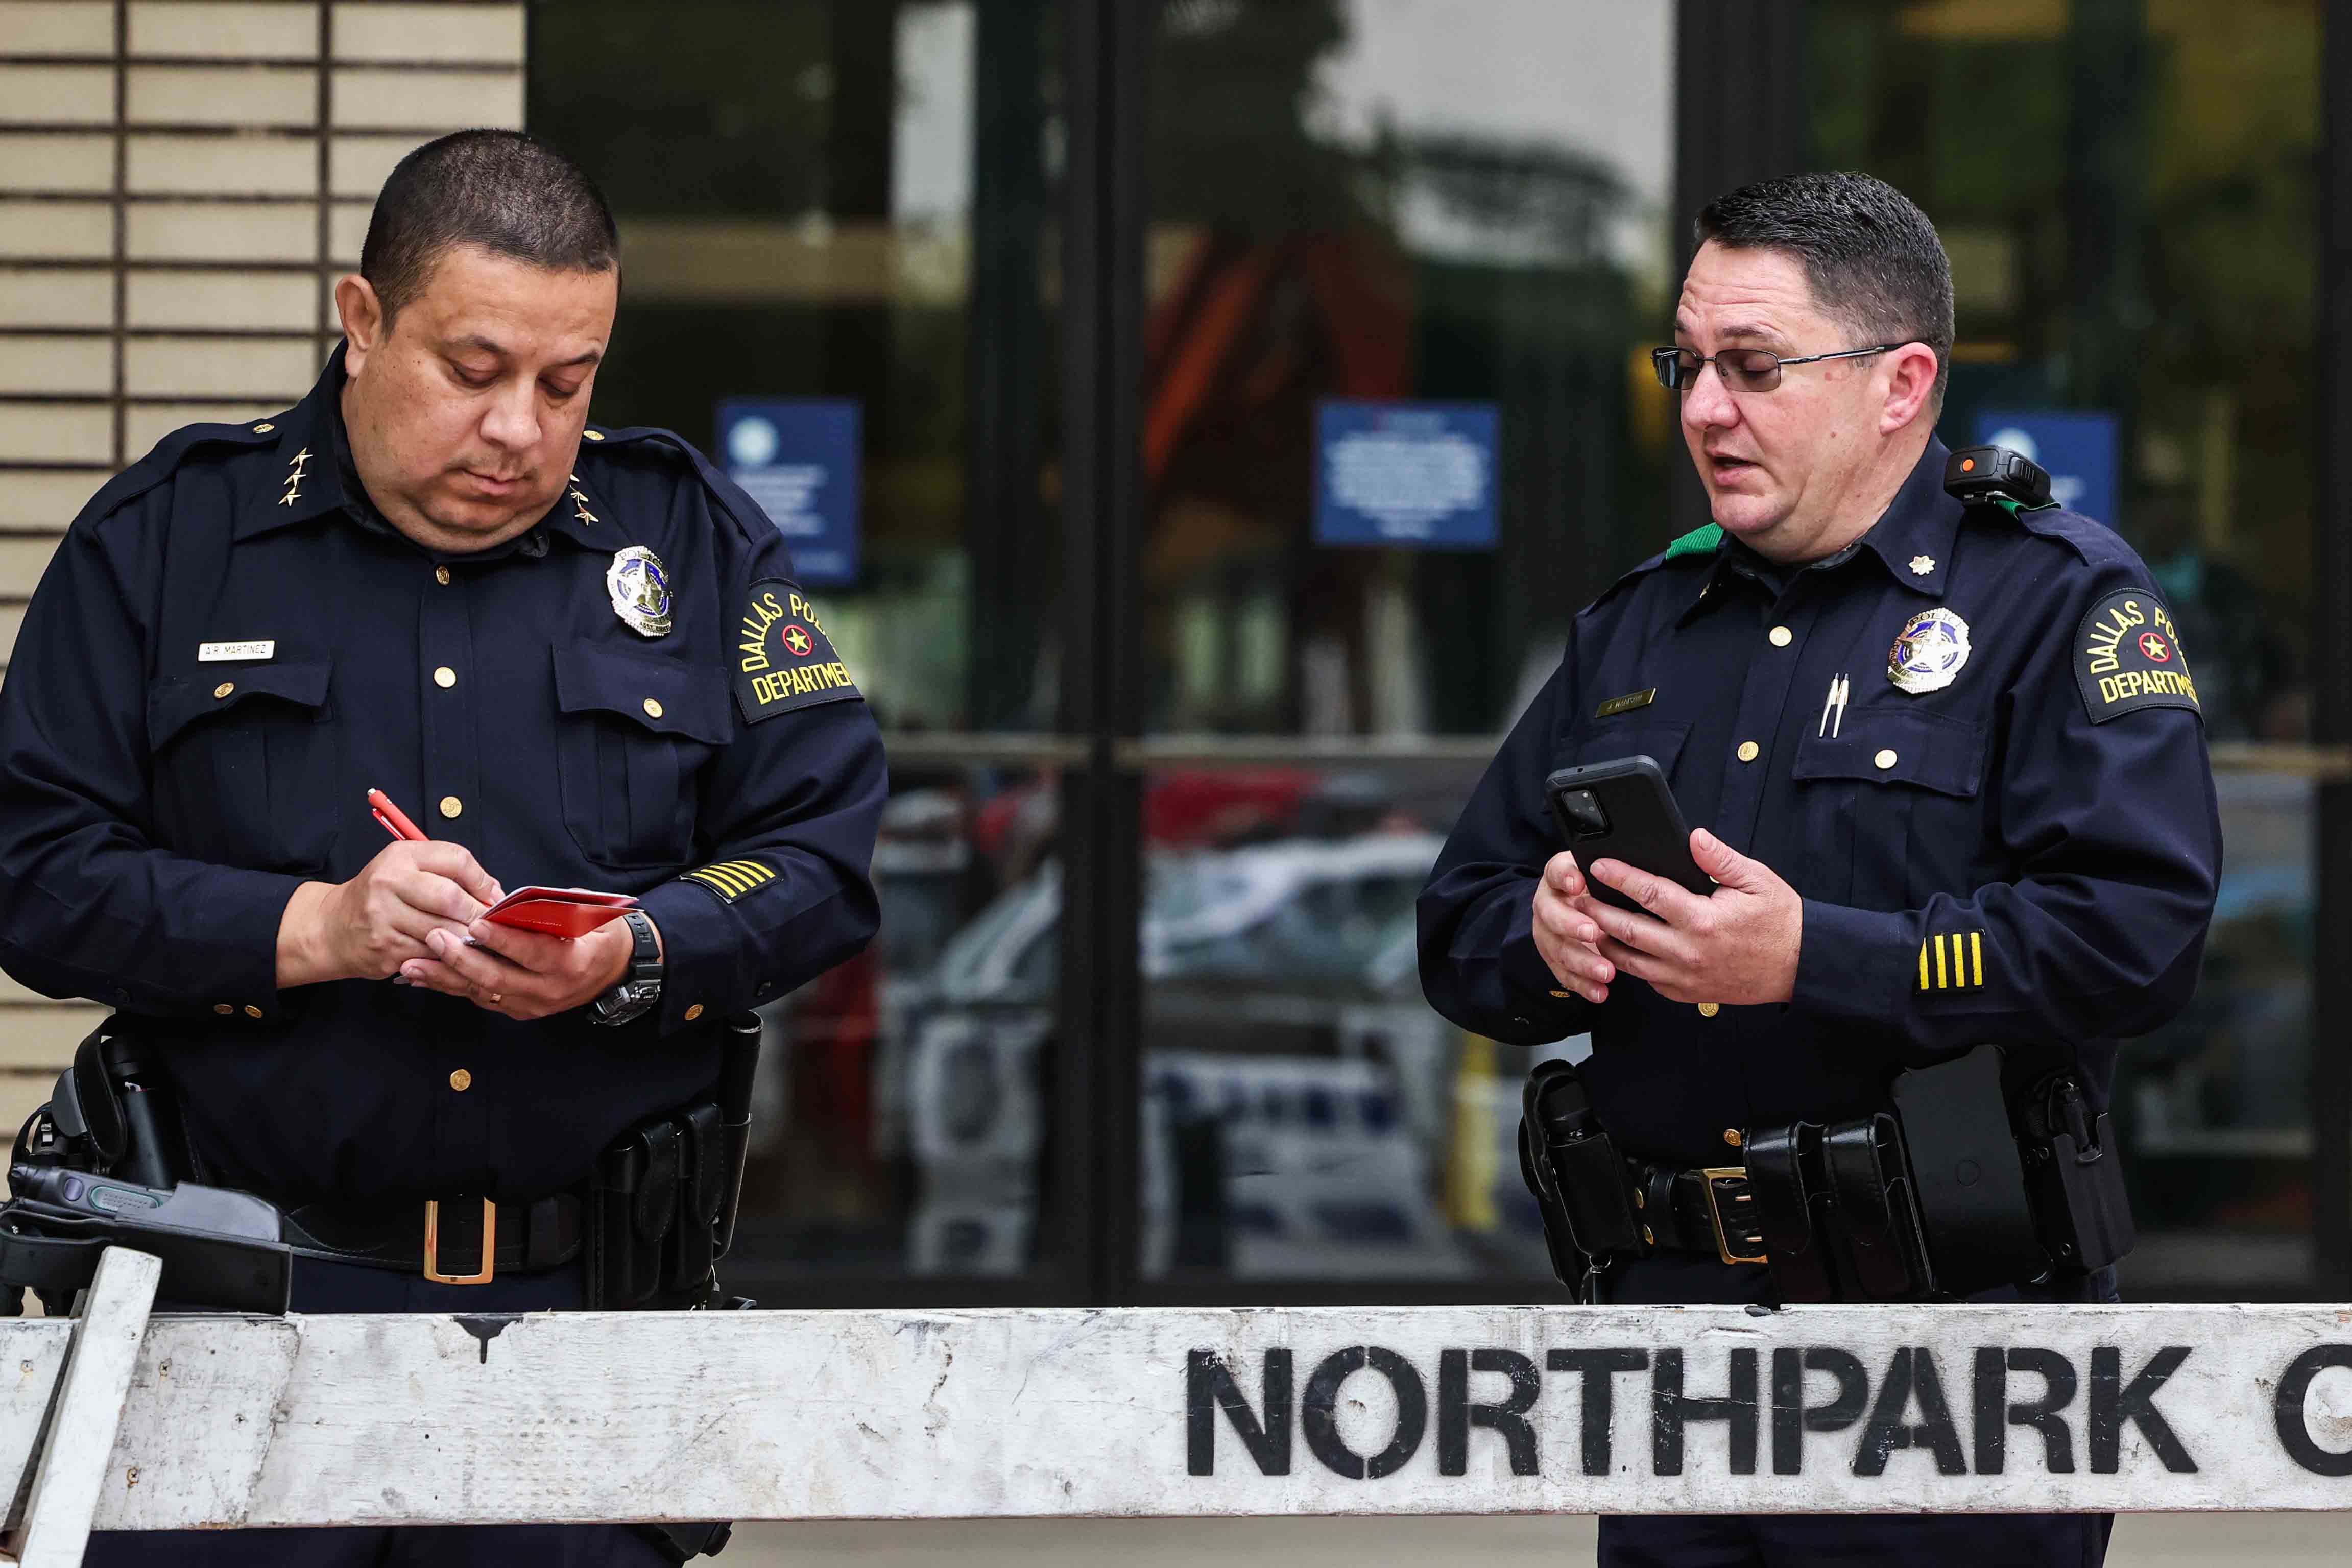 Dallas PD: Man with skateboard causes mass panic, evacuations at NorthPark  Mall